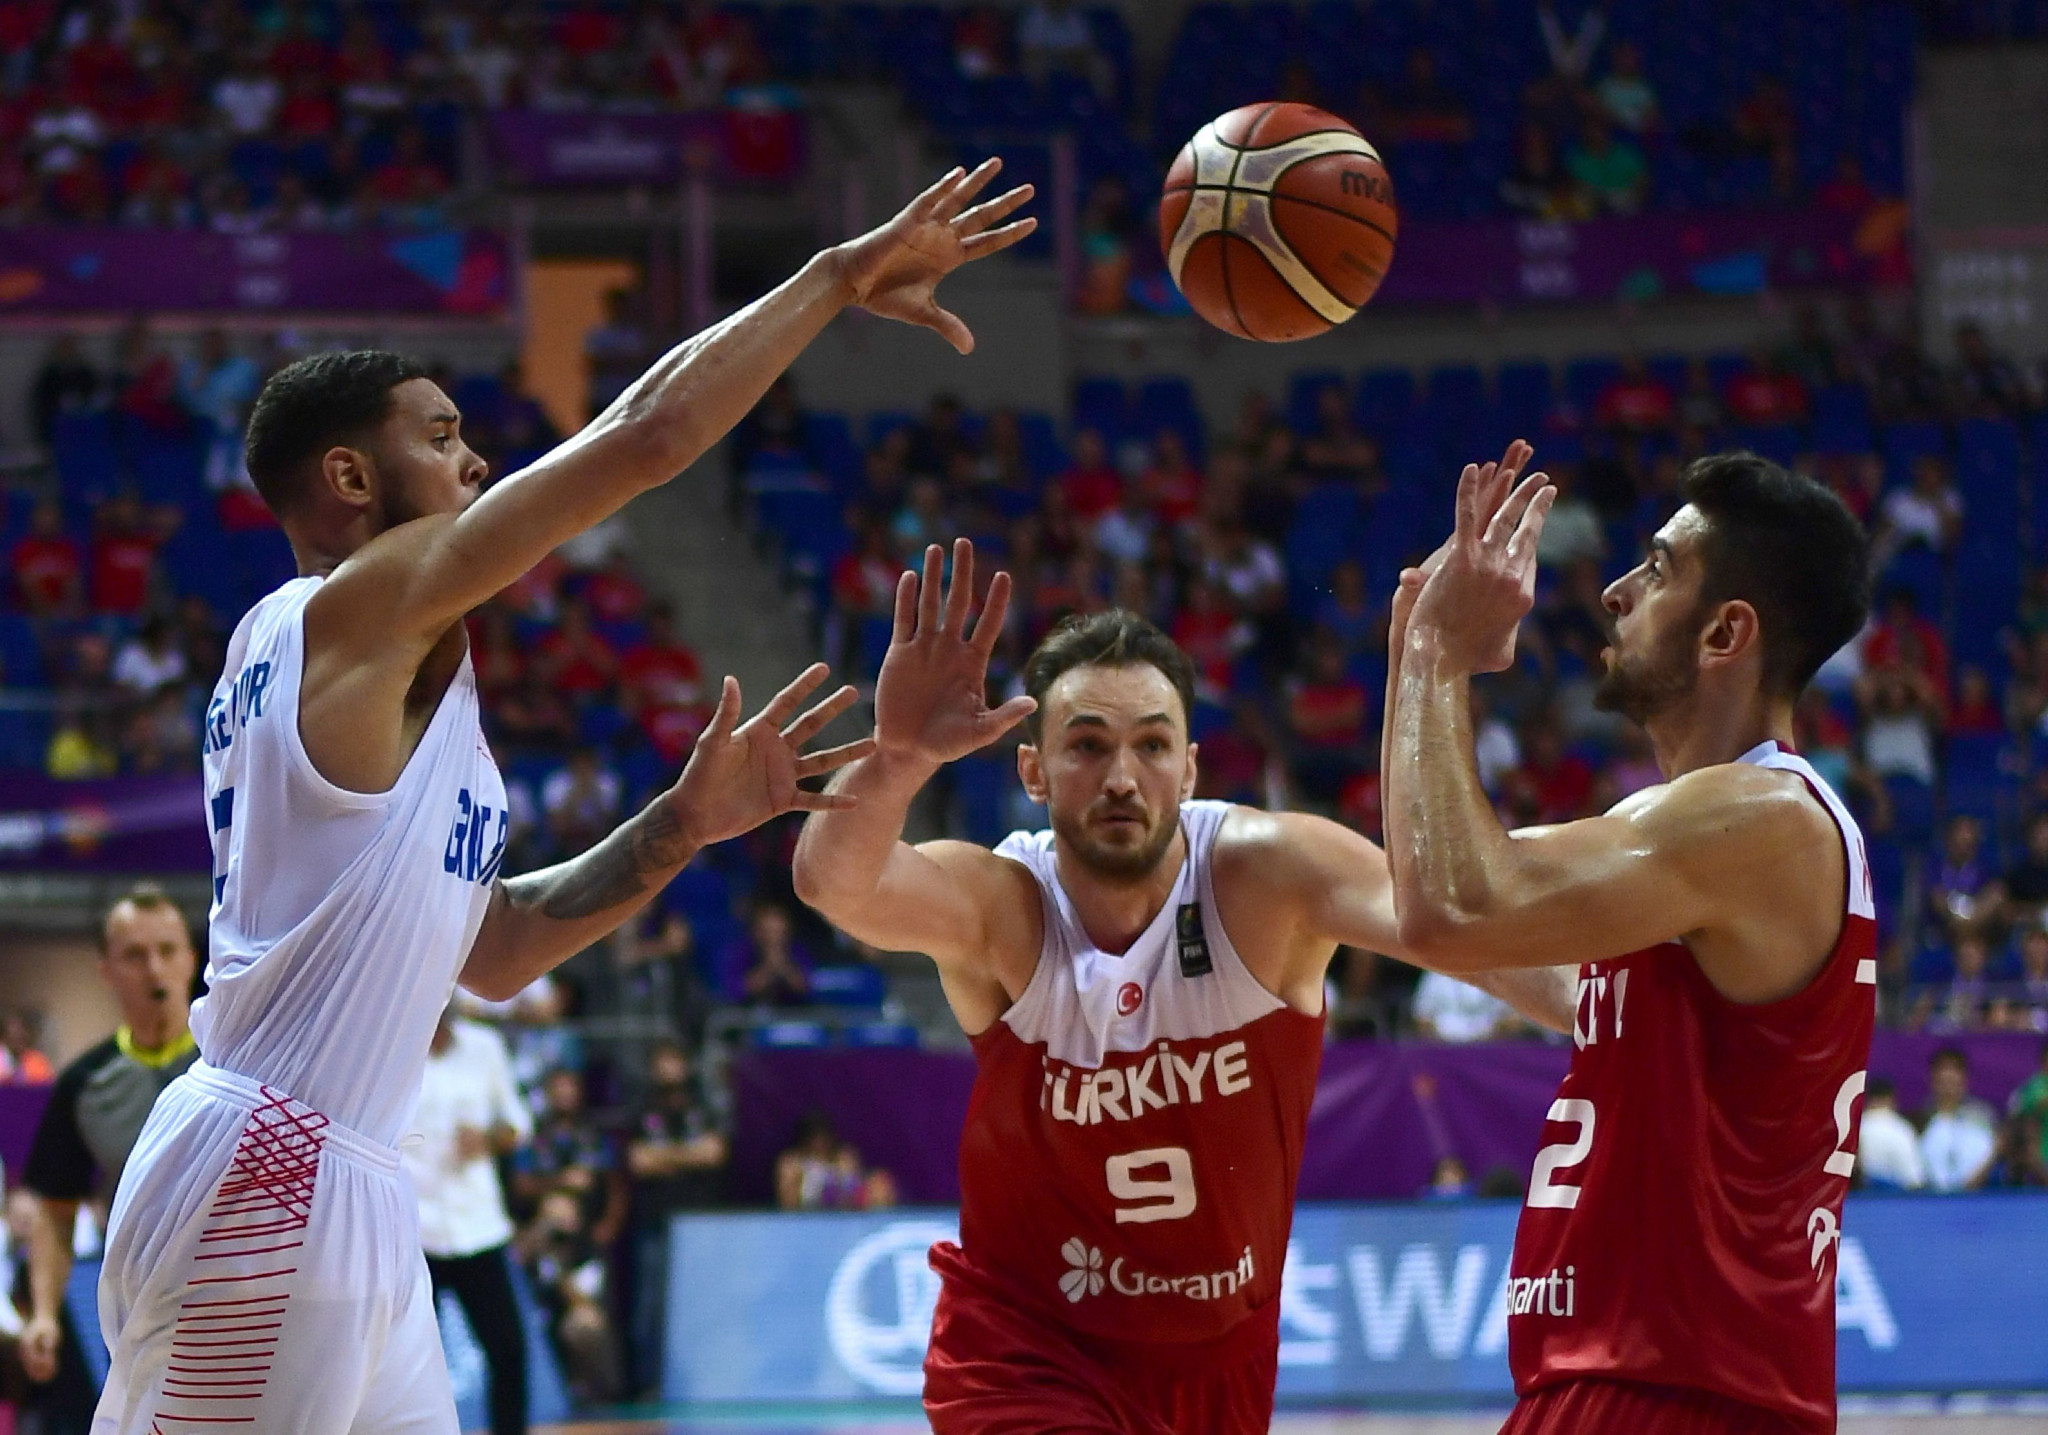 Britain's men's team have been participating in EuroBasket this month ©Getty Images